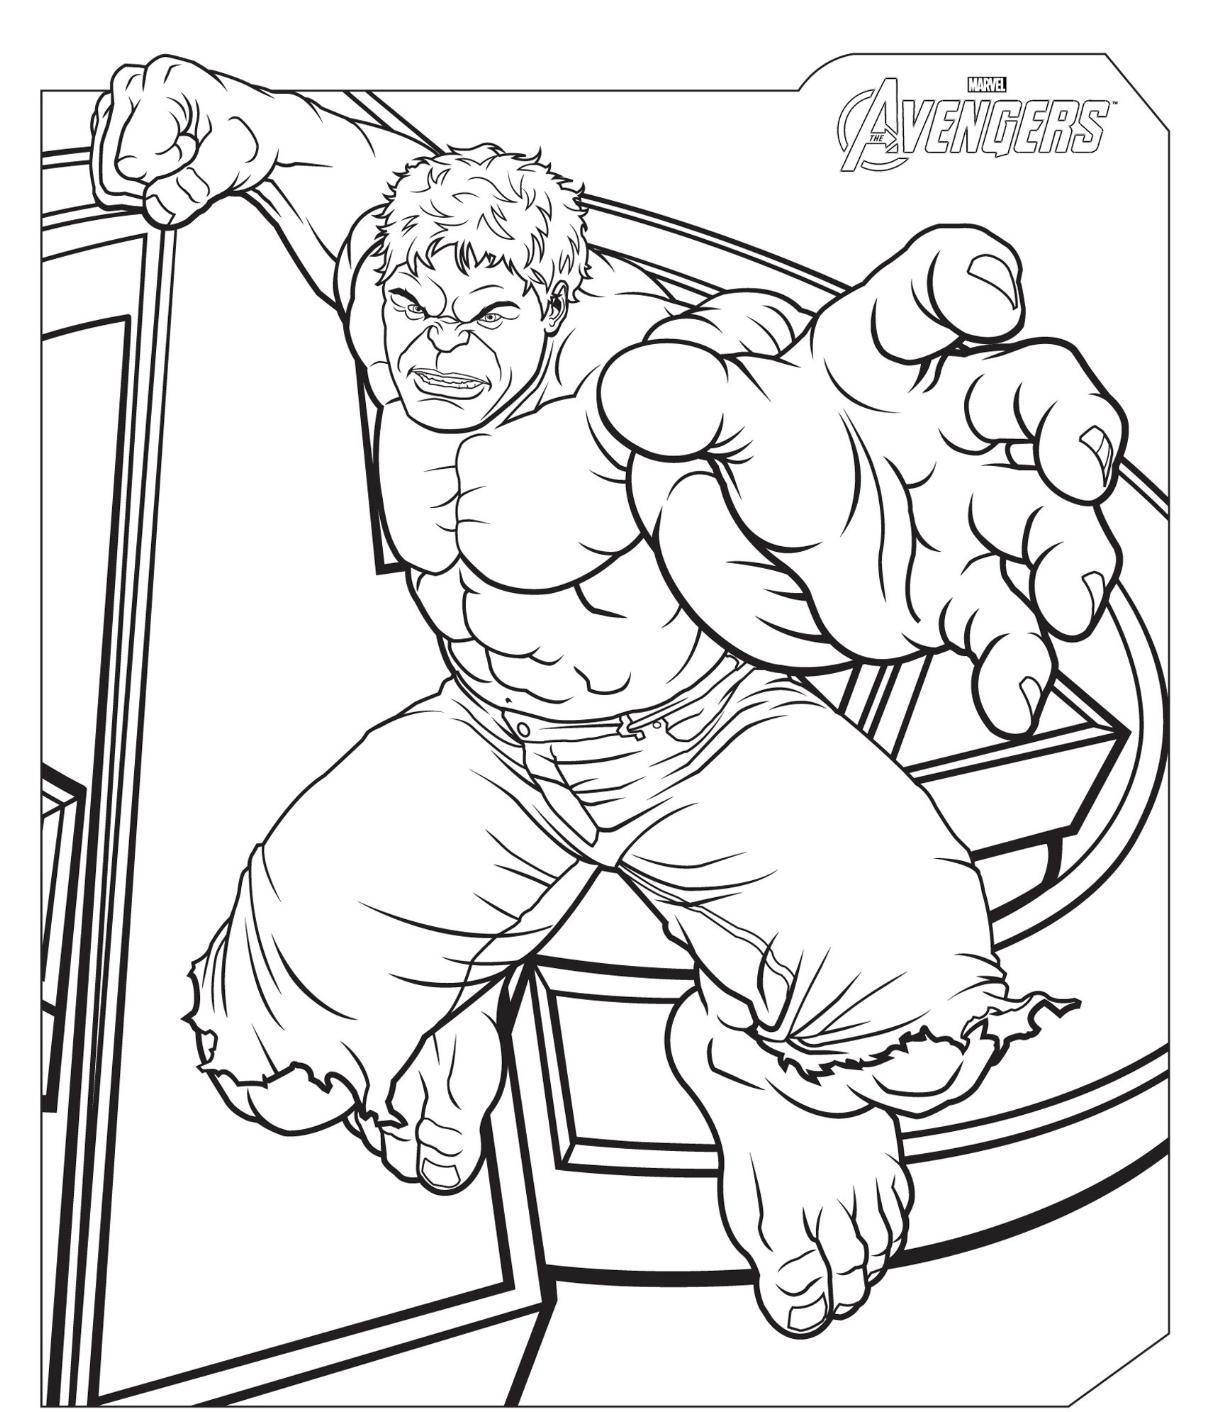 Coloring Sheets For Boys While Travelin
 Hulk Coloring Pages Bestofcoloring